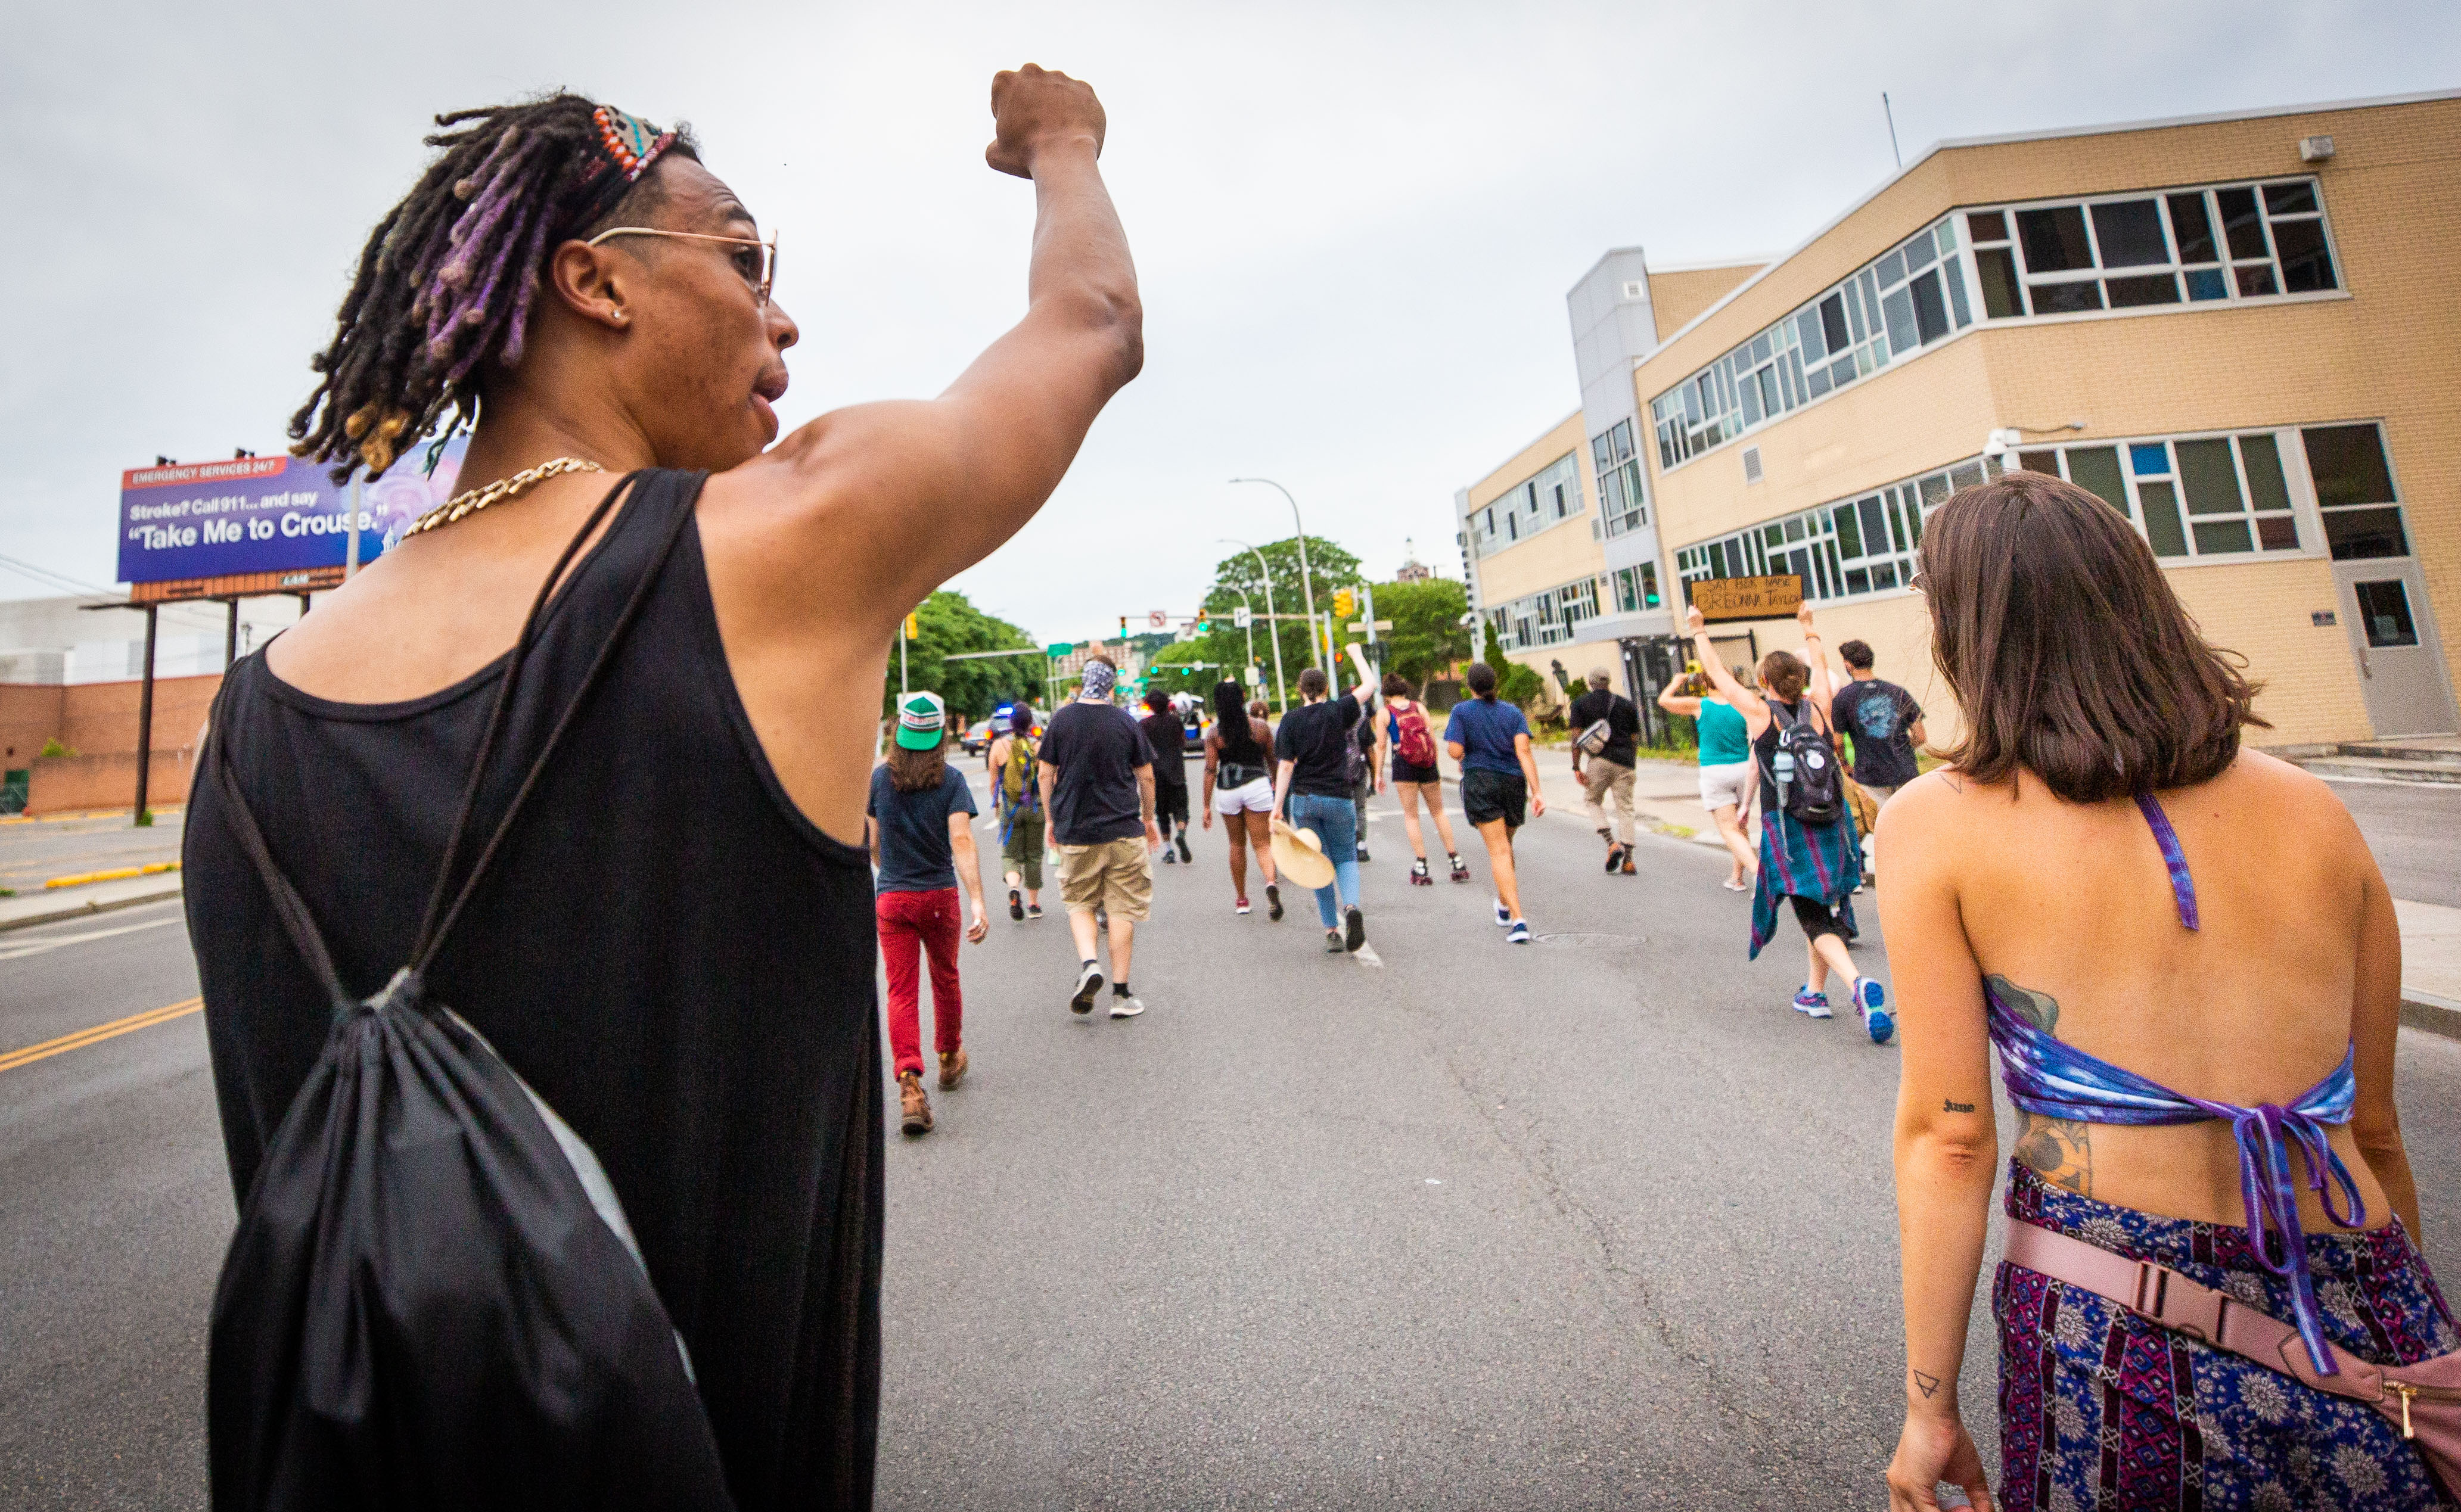 Demonstrators led by Ragin Mickens marched Friday, July 10, 2020, which marched them into Strathmore neighborhood to Mayor Ben Walsh's home. In all, demonstrators have marched more than 124 miles over the 40-plus days to protest against police brutality in the wake of the death of George Floyd.